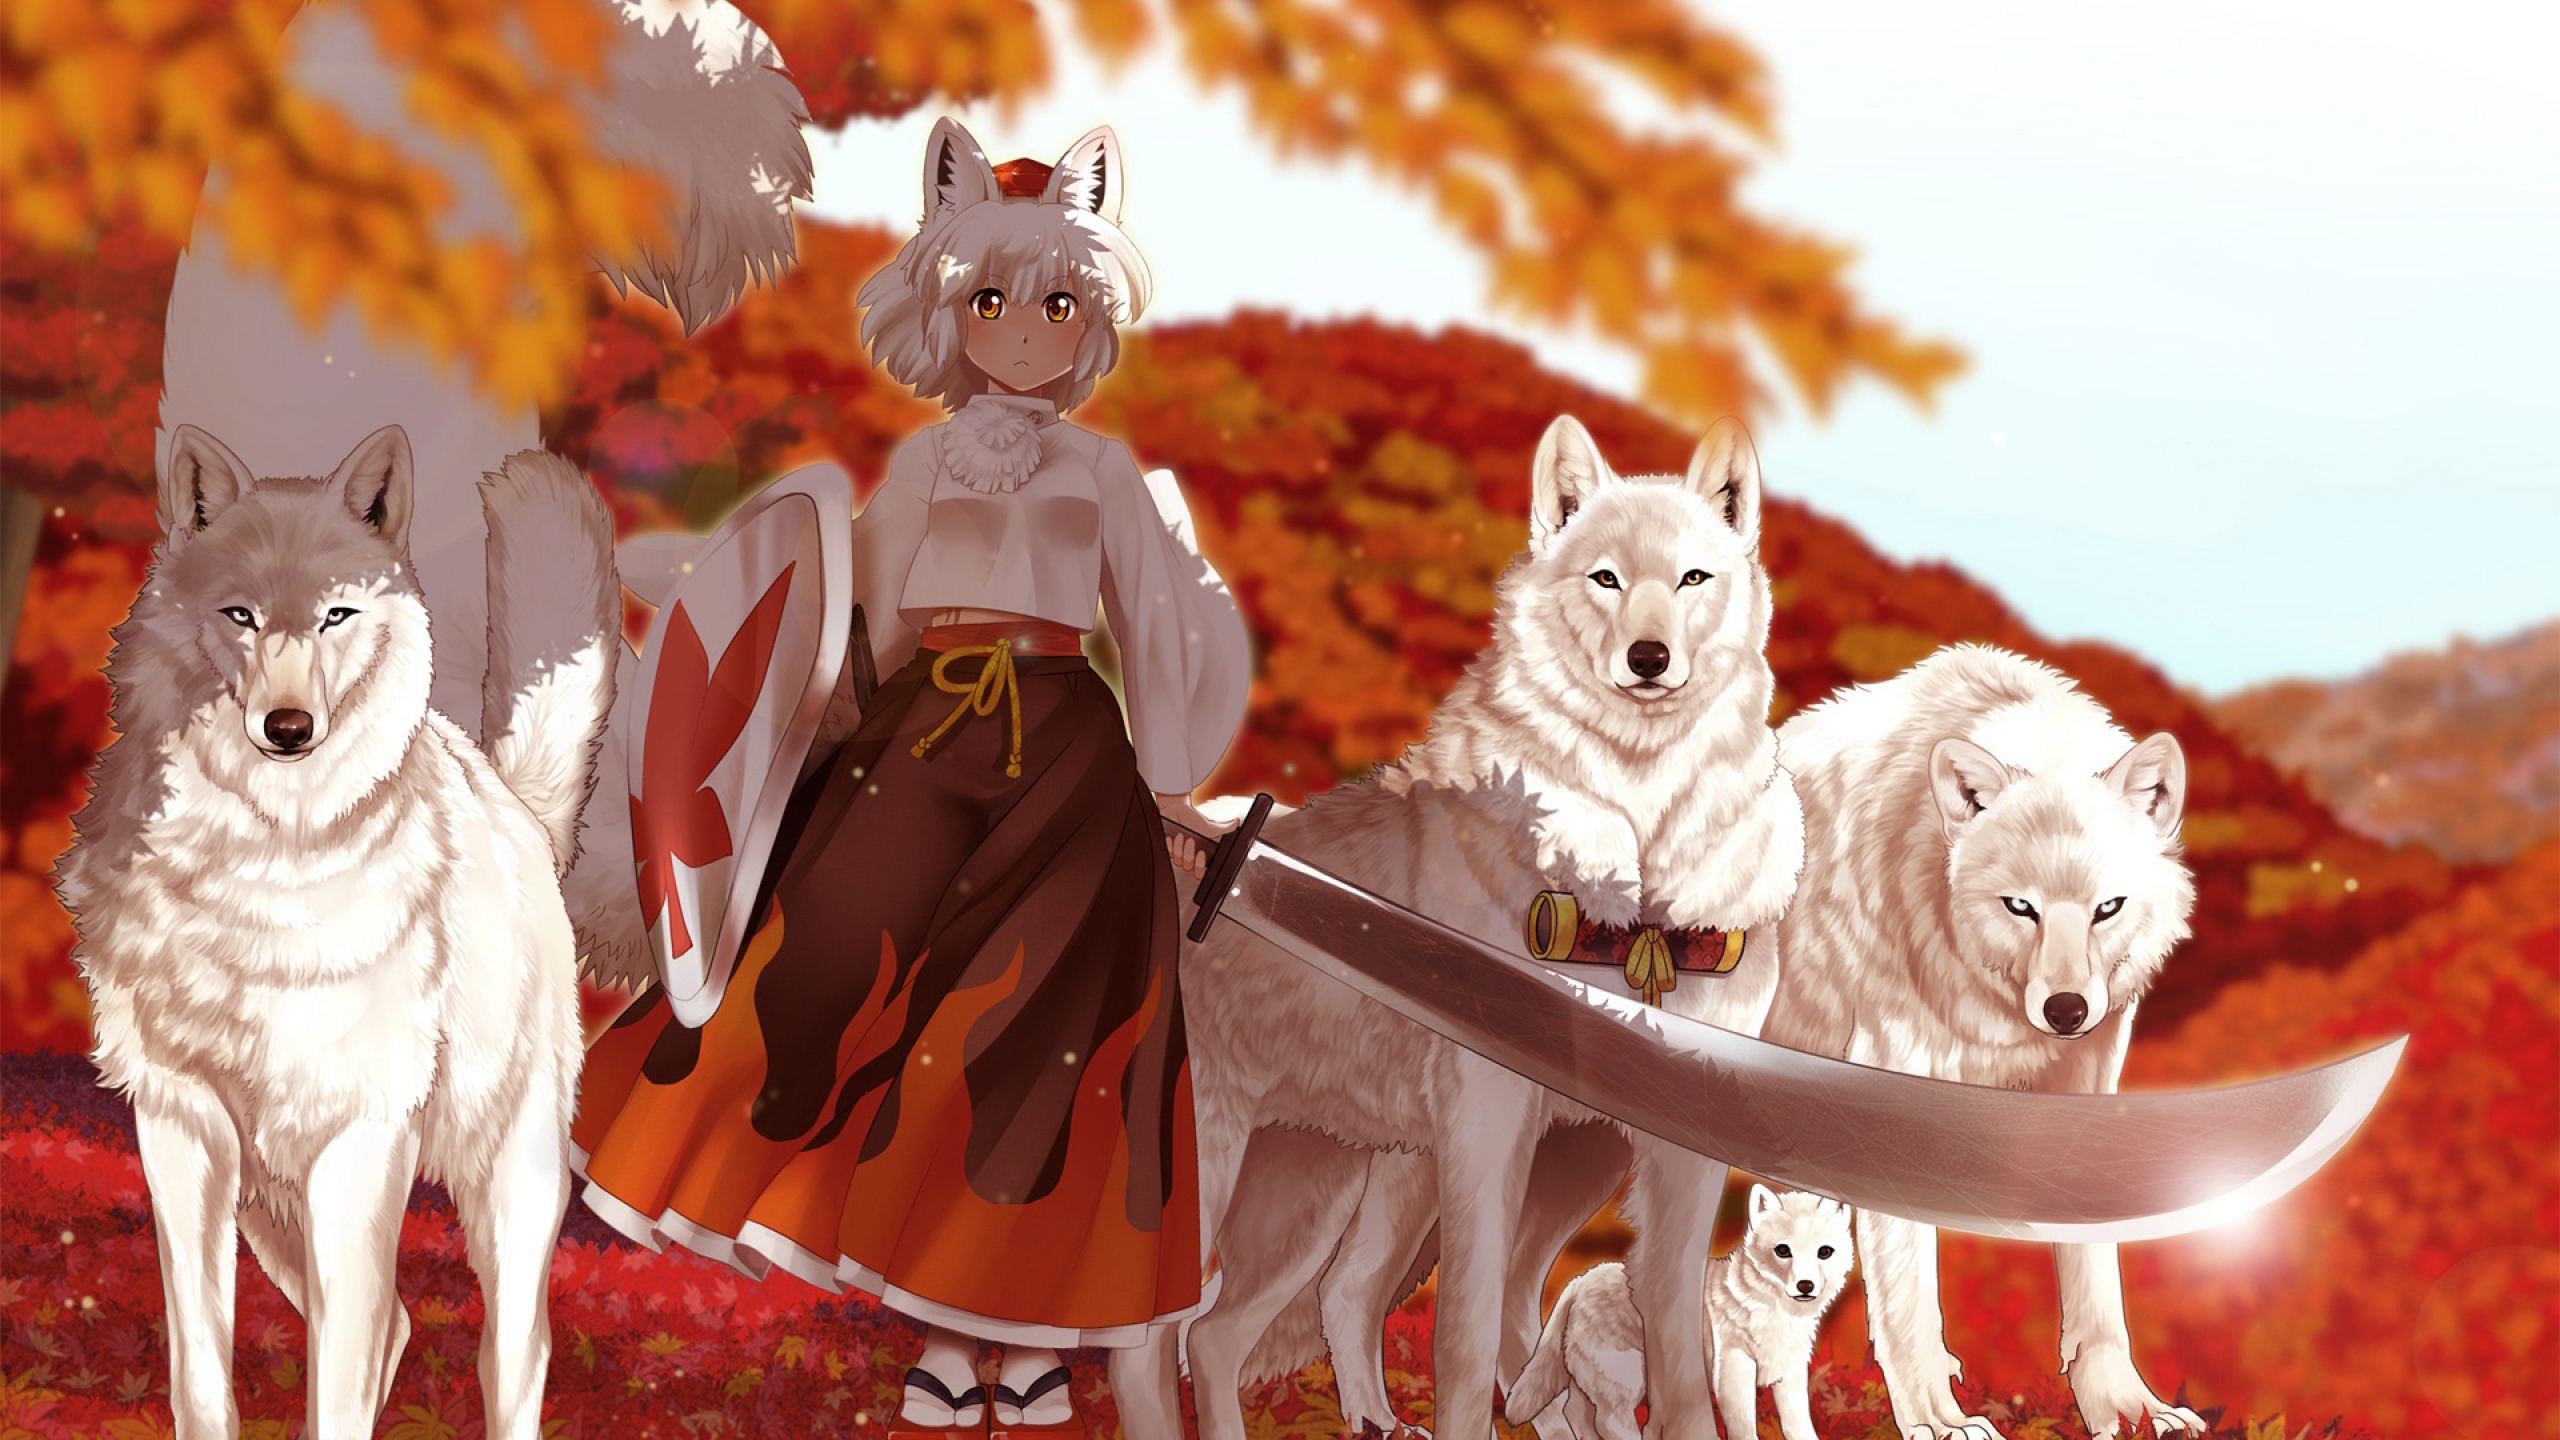 Anime Wolf Images Browse 1438 Stock Photos  Vectors Free Download with  Trial  Shutterstock